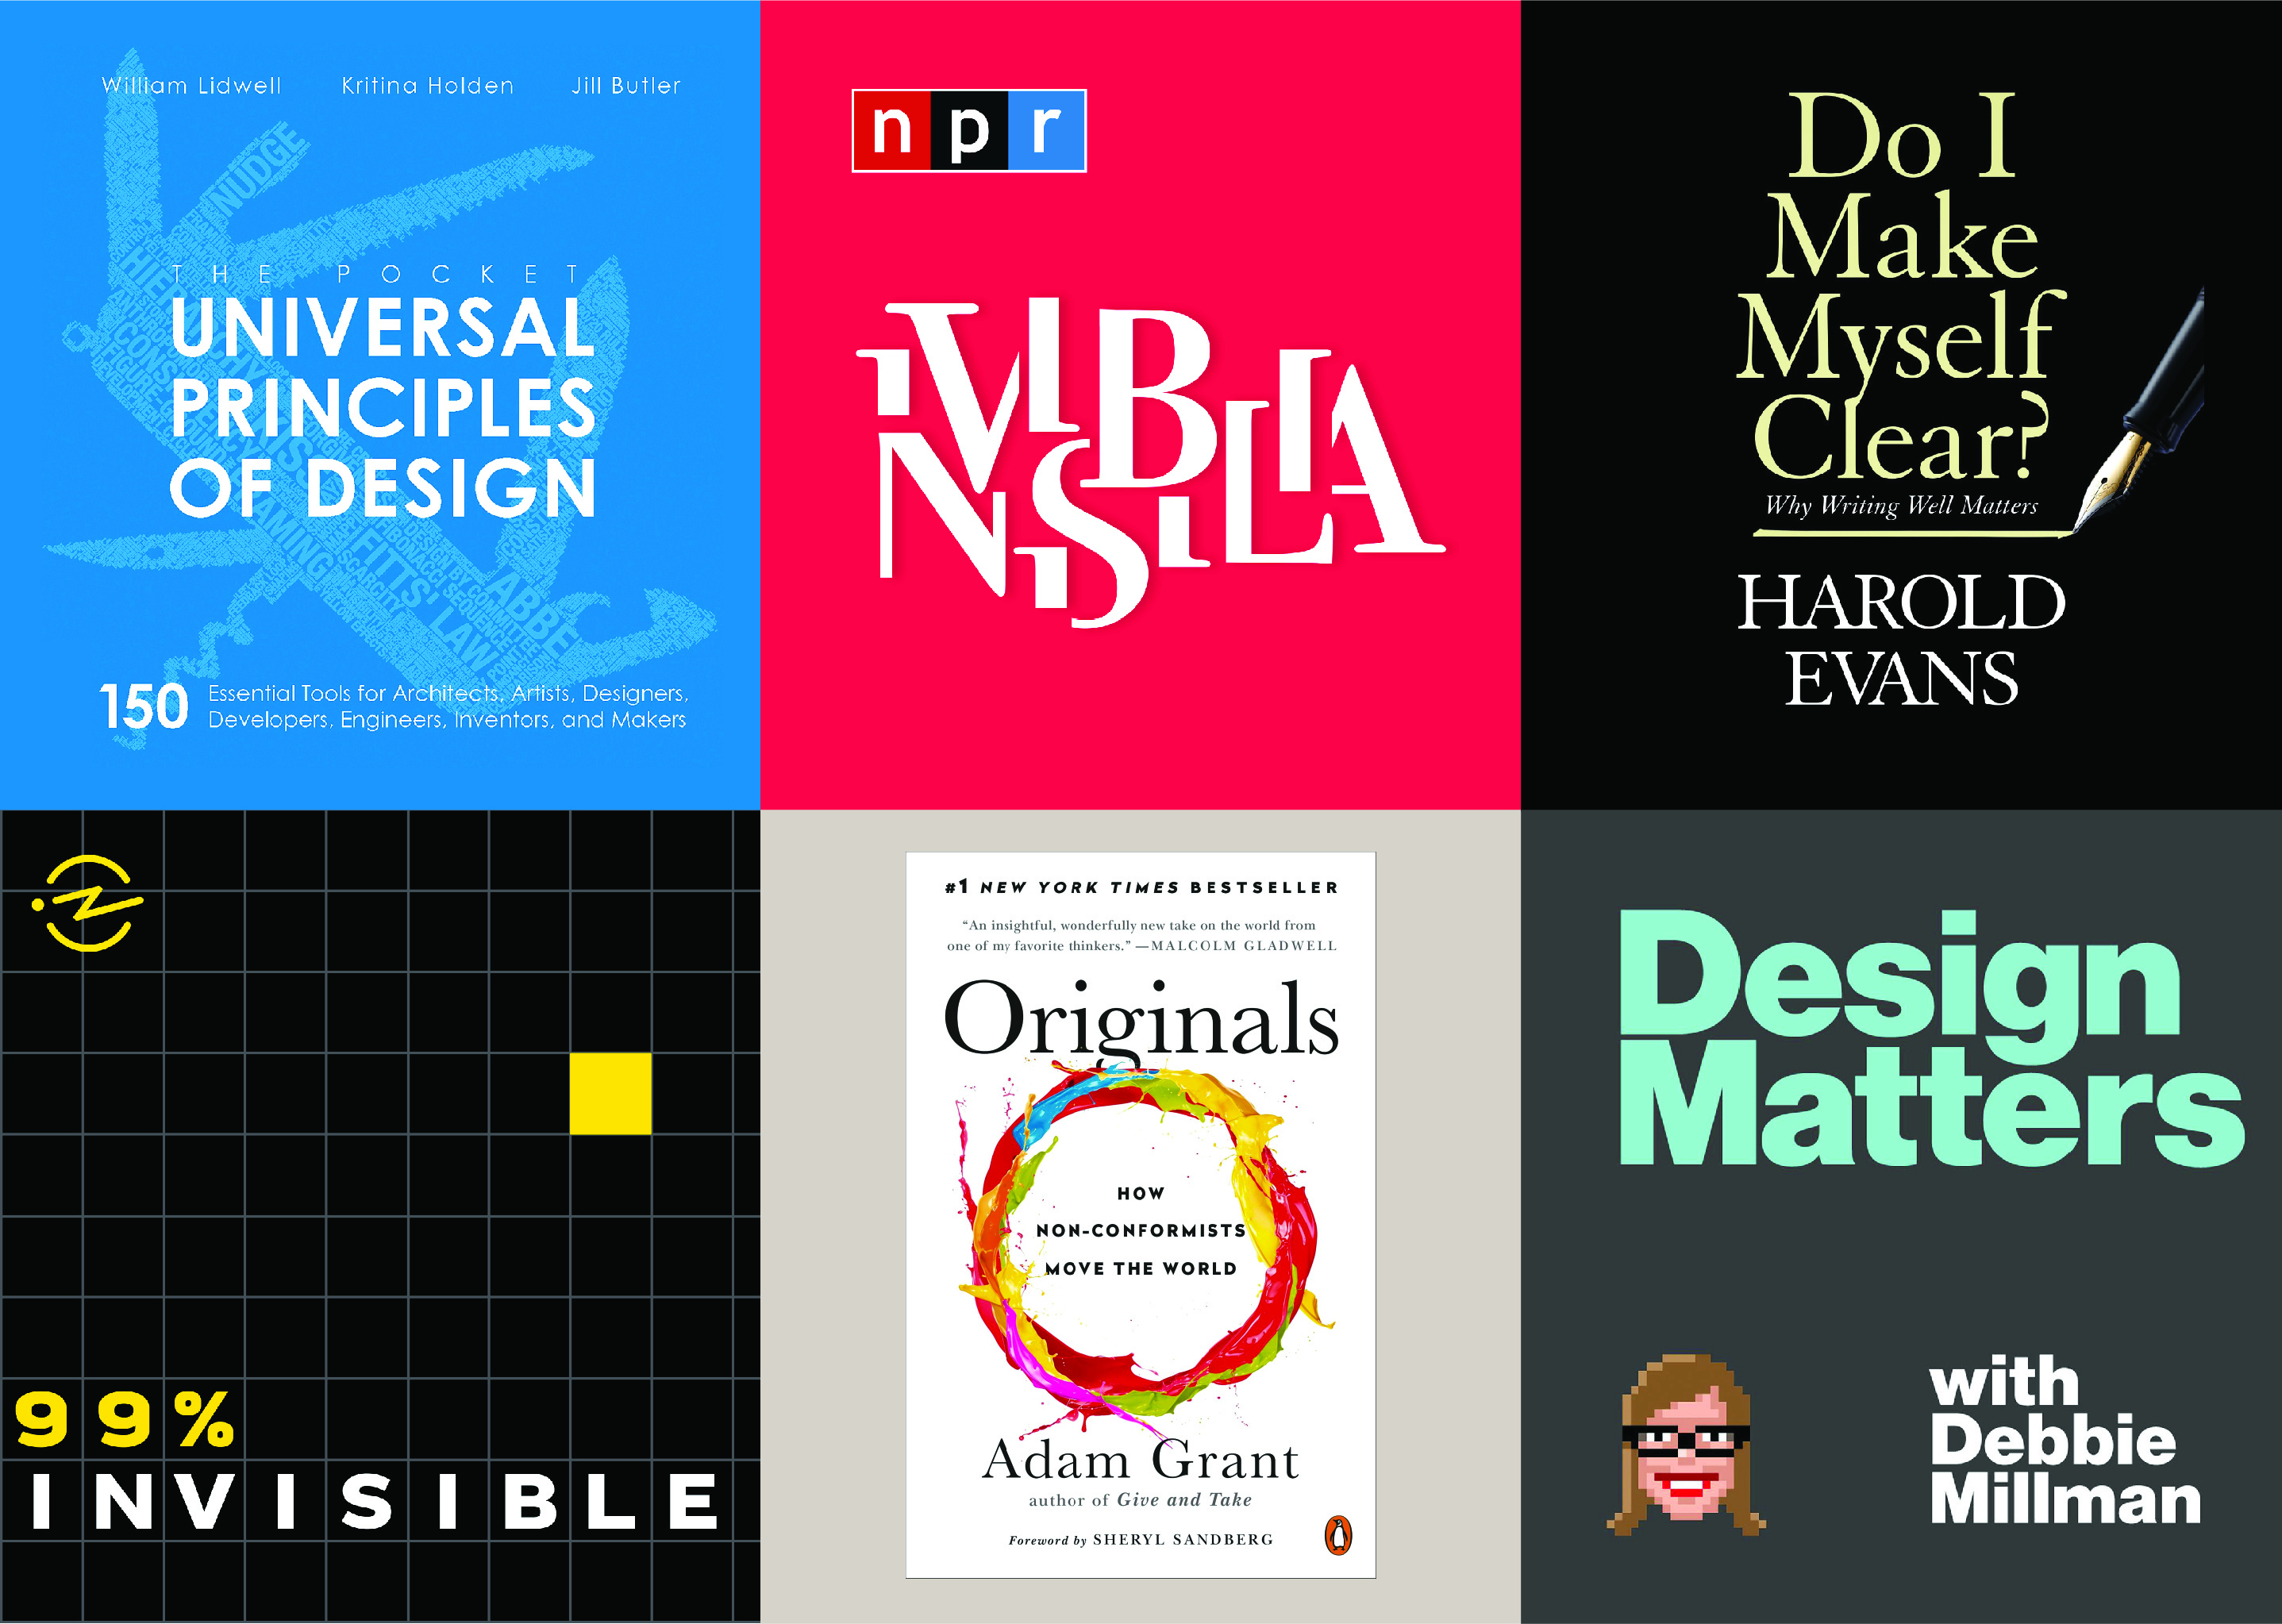 A grid of book covers for the books Universal Principles of Design, Design Matters, Do I Make Myself clear, and others.